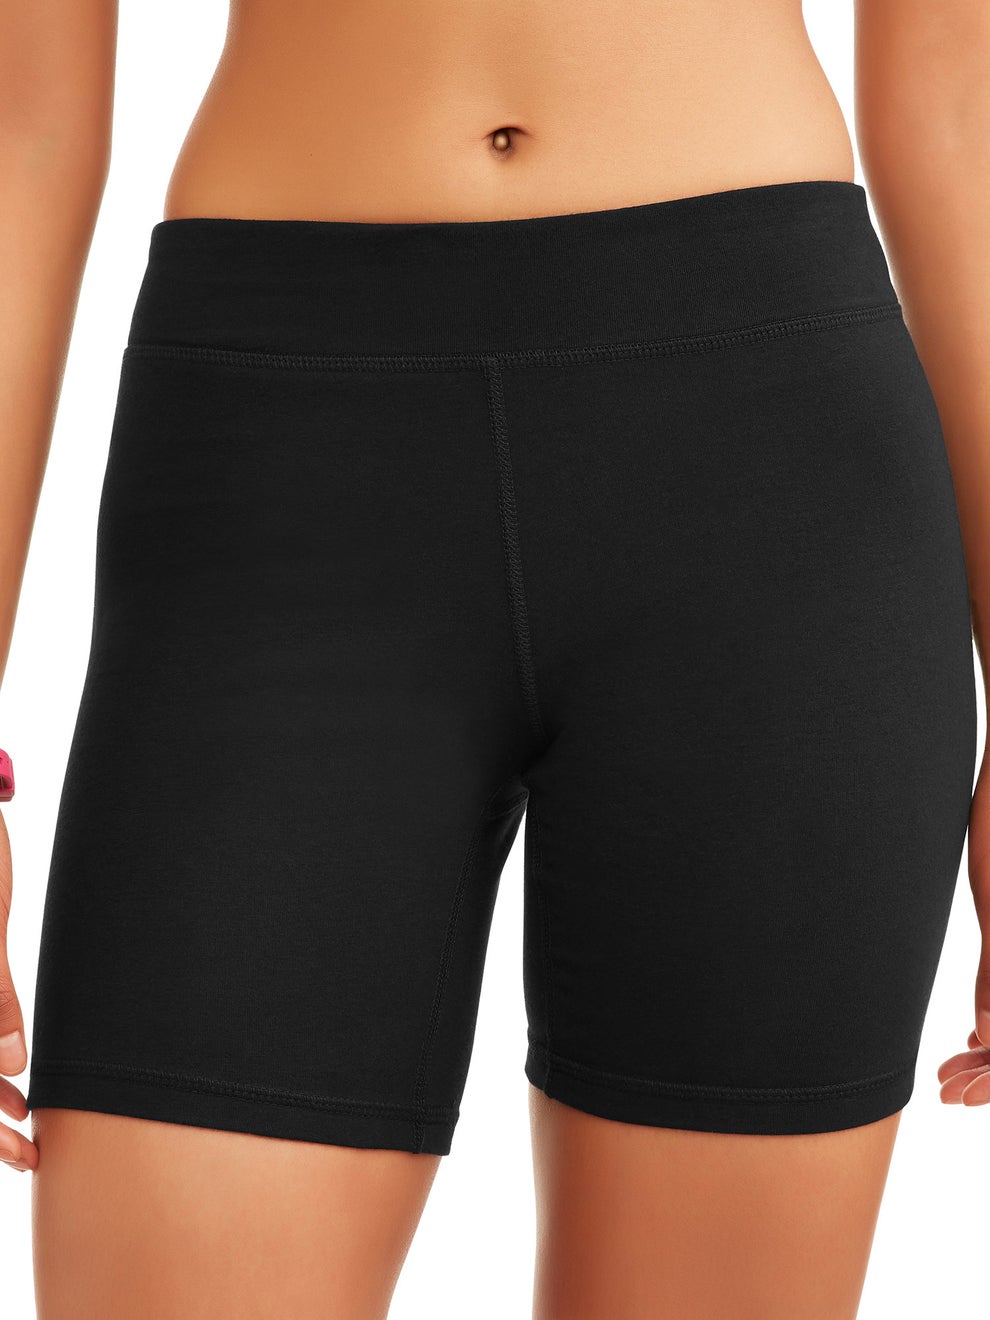 19 Comfy Pieces Of Clothing From Walmart That Might Make It Hard To ...